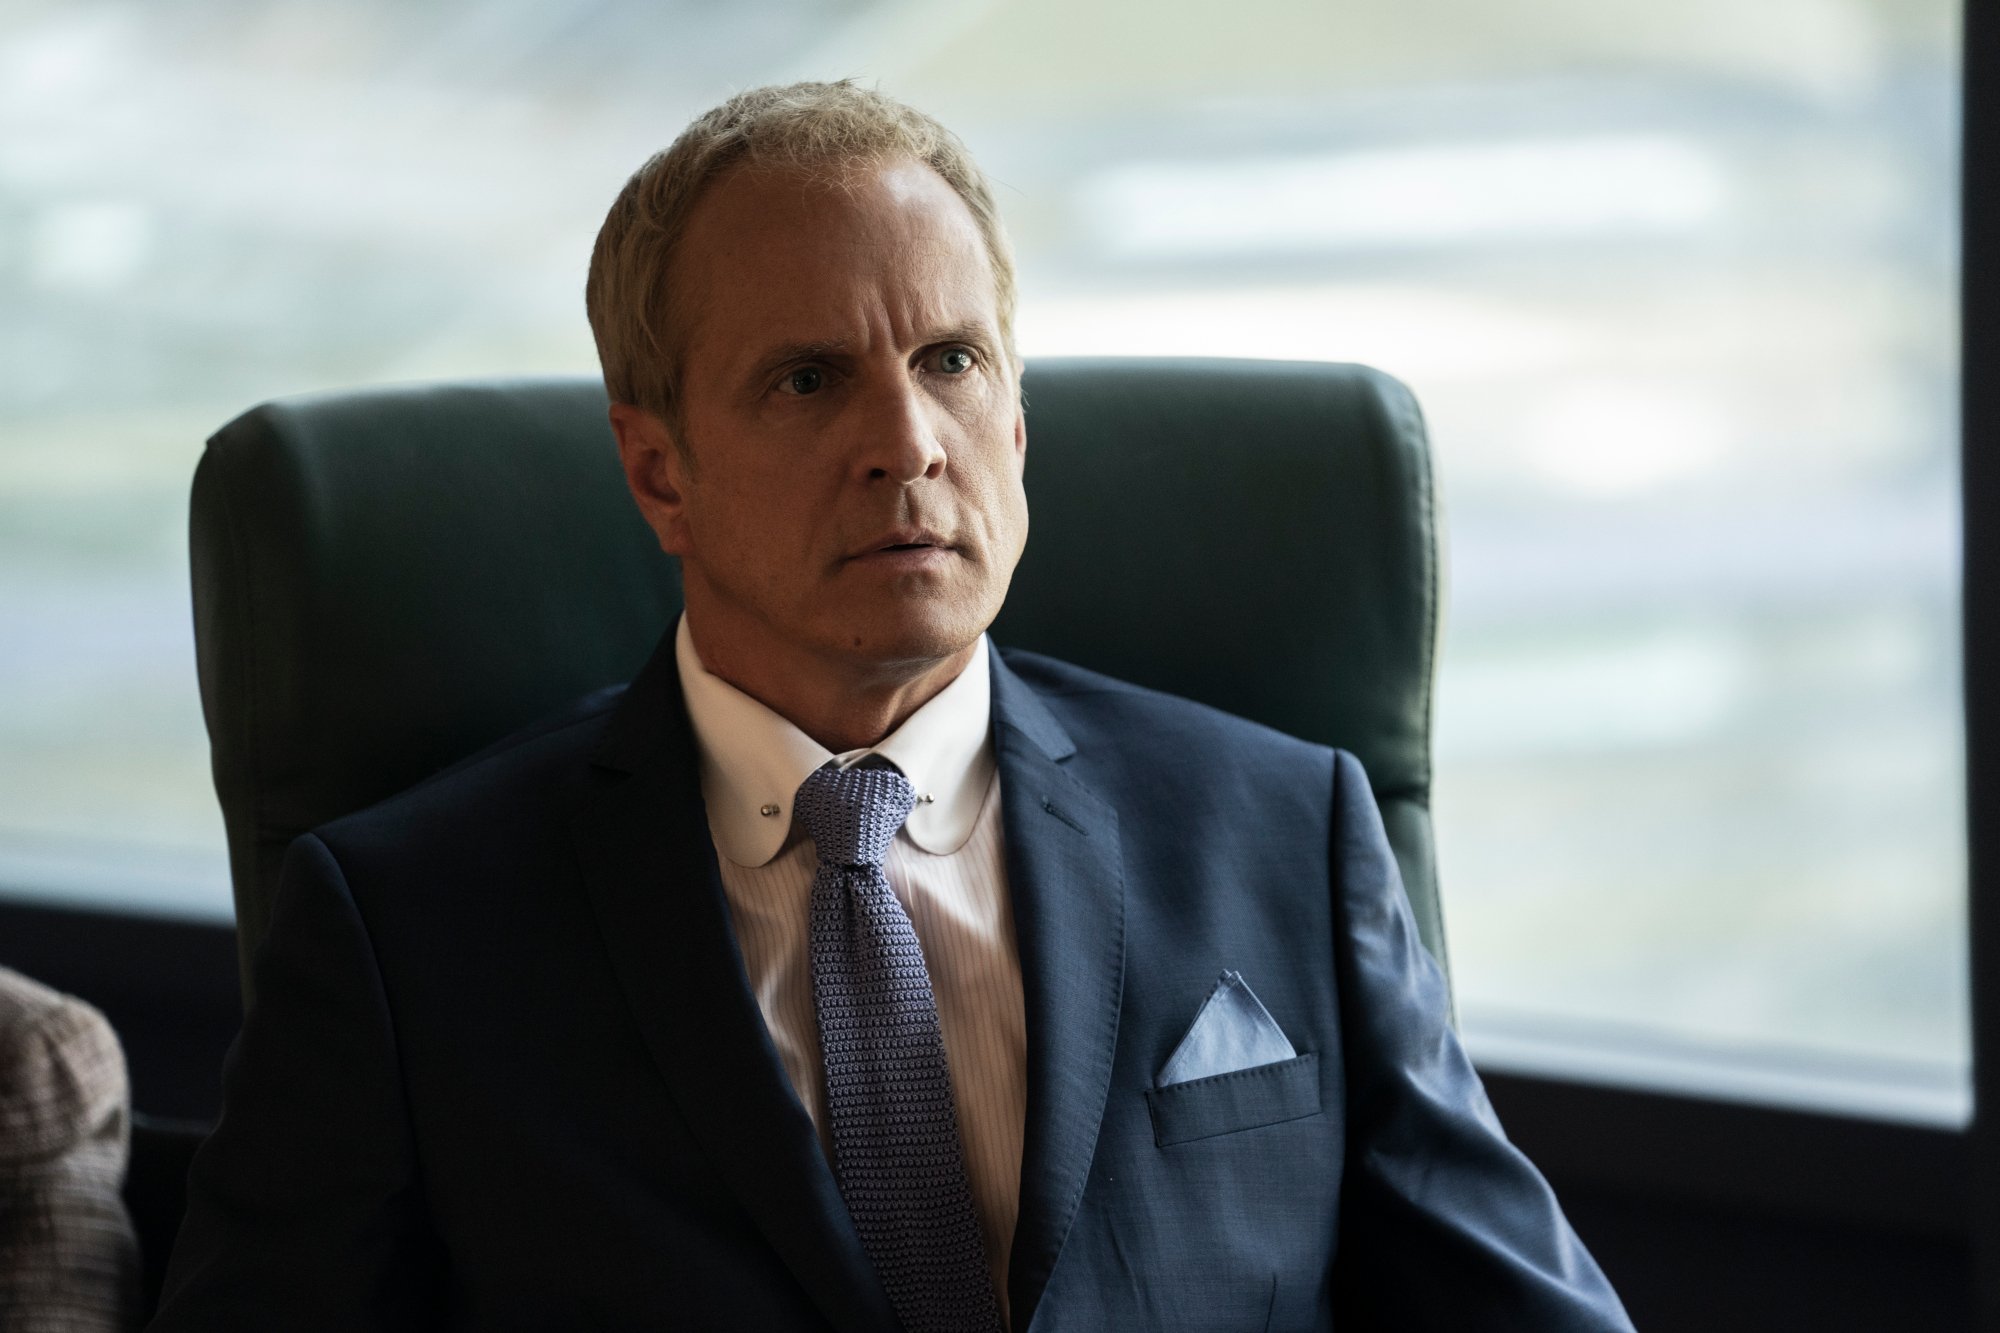 Patrick Fabian as Howard Hamlin in 'Better Call Saul' Season 6 Episode 7. He's wearing a dark blue suit and sitting at a desk.